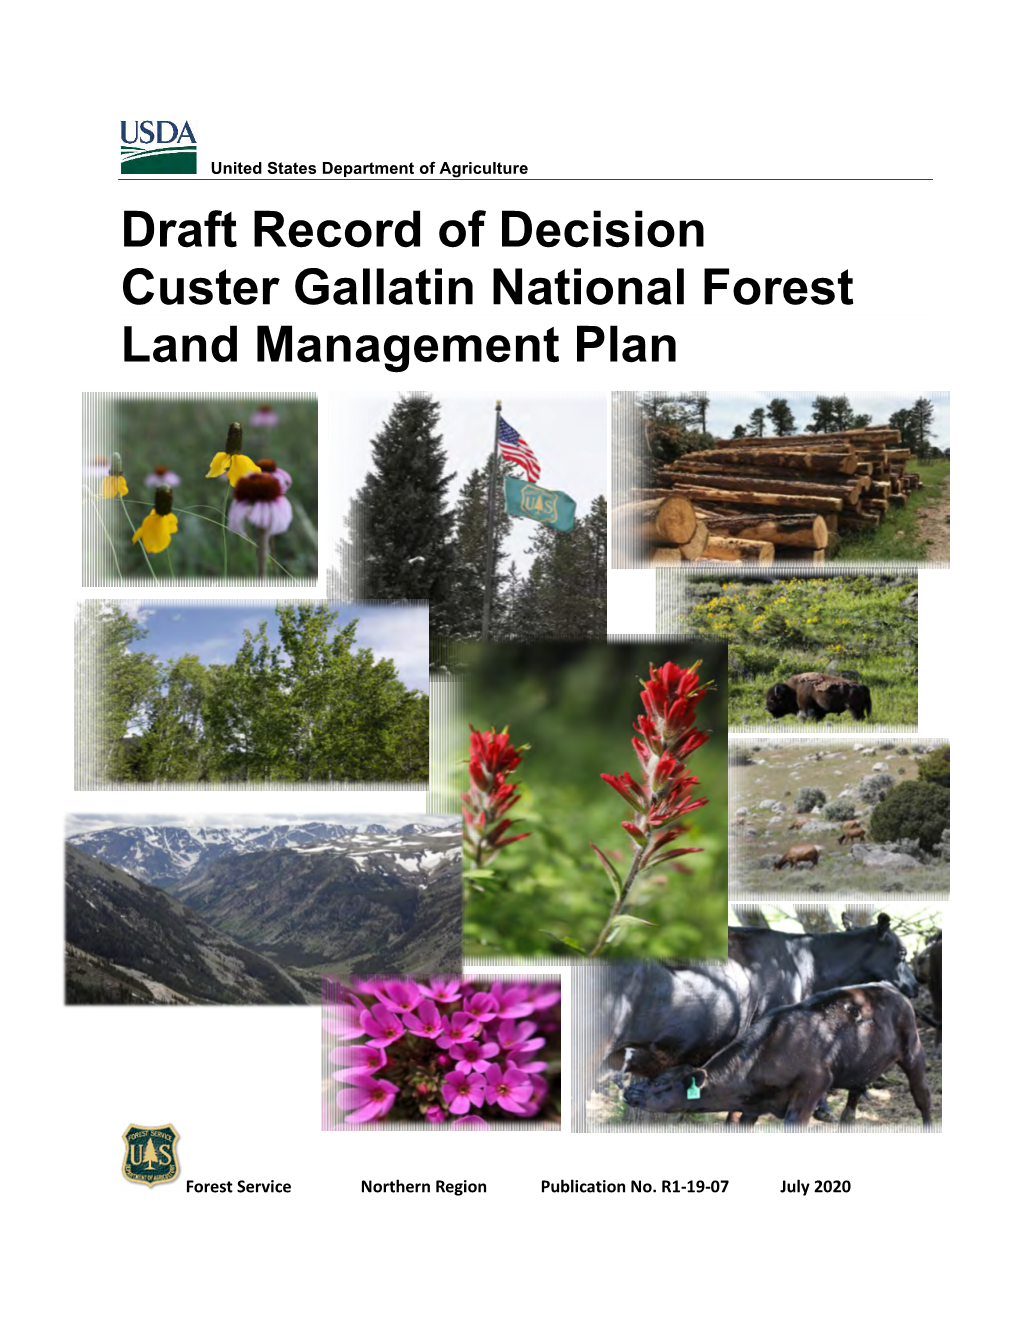 Draft Record of Decision for the Custer Gallatin National Forest Land